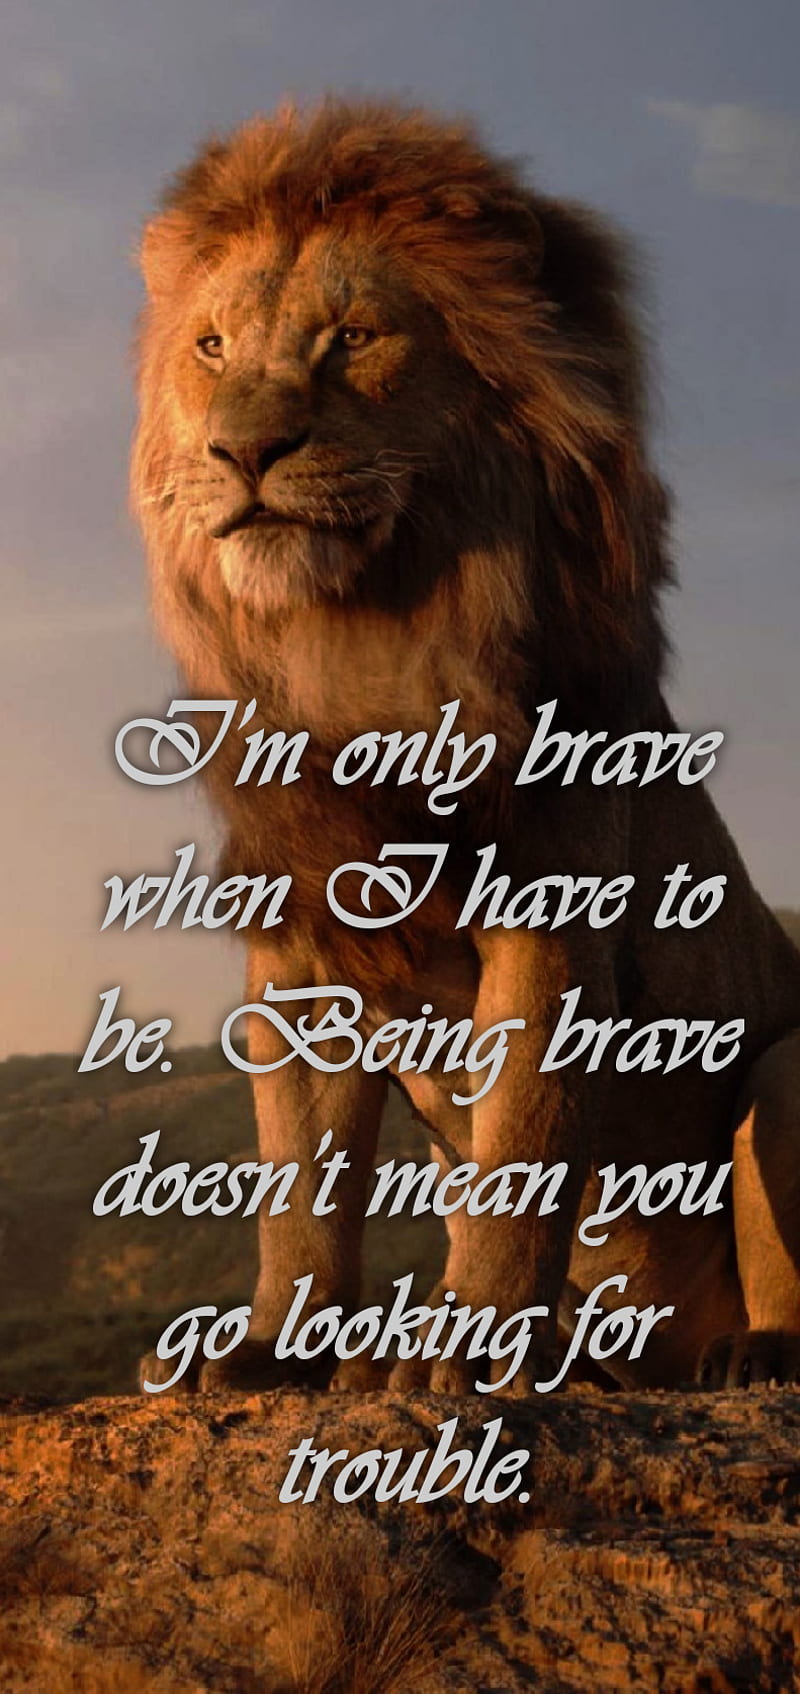 Lion king, brave, life quotes, quote, quotes, simba, HD phone wallpaper